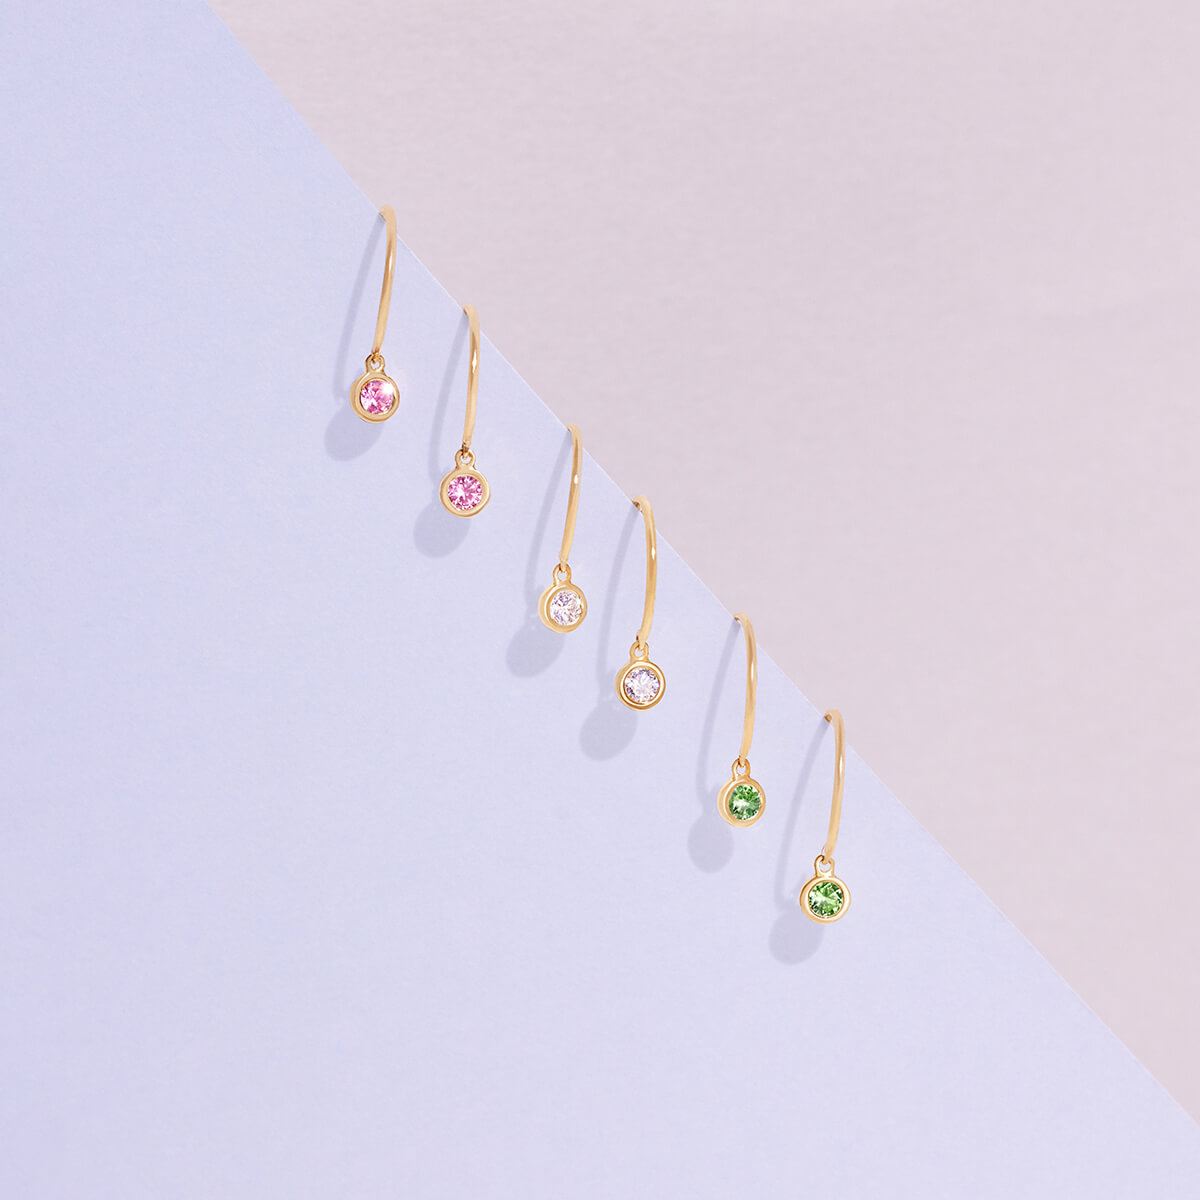 nudity color earring (pink sapphire)